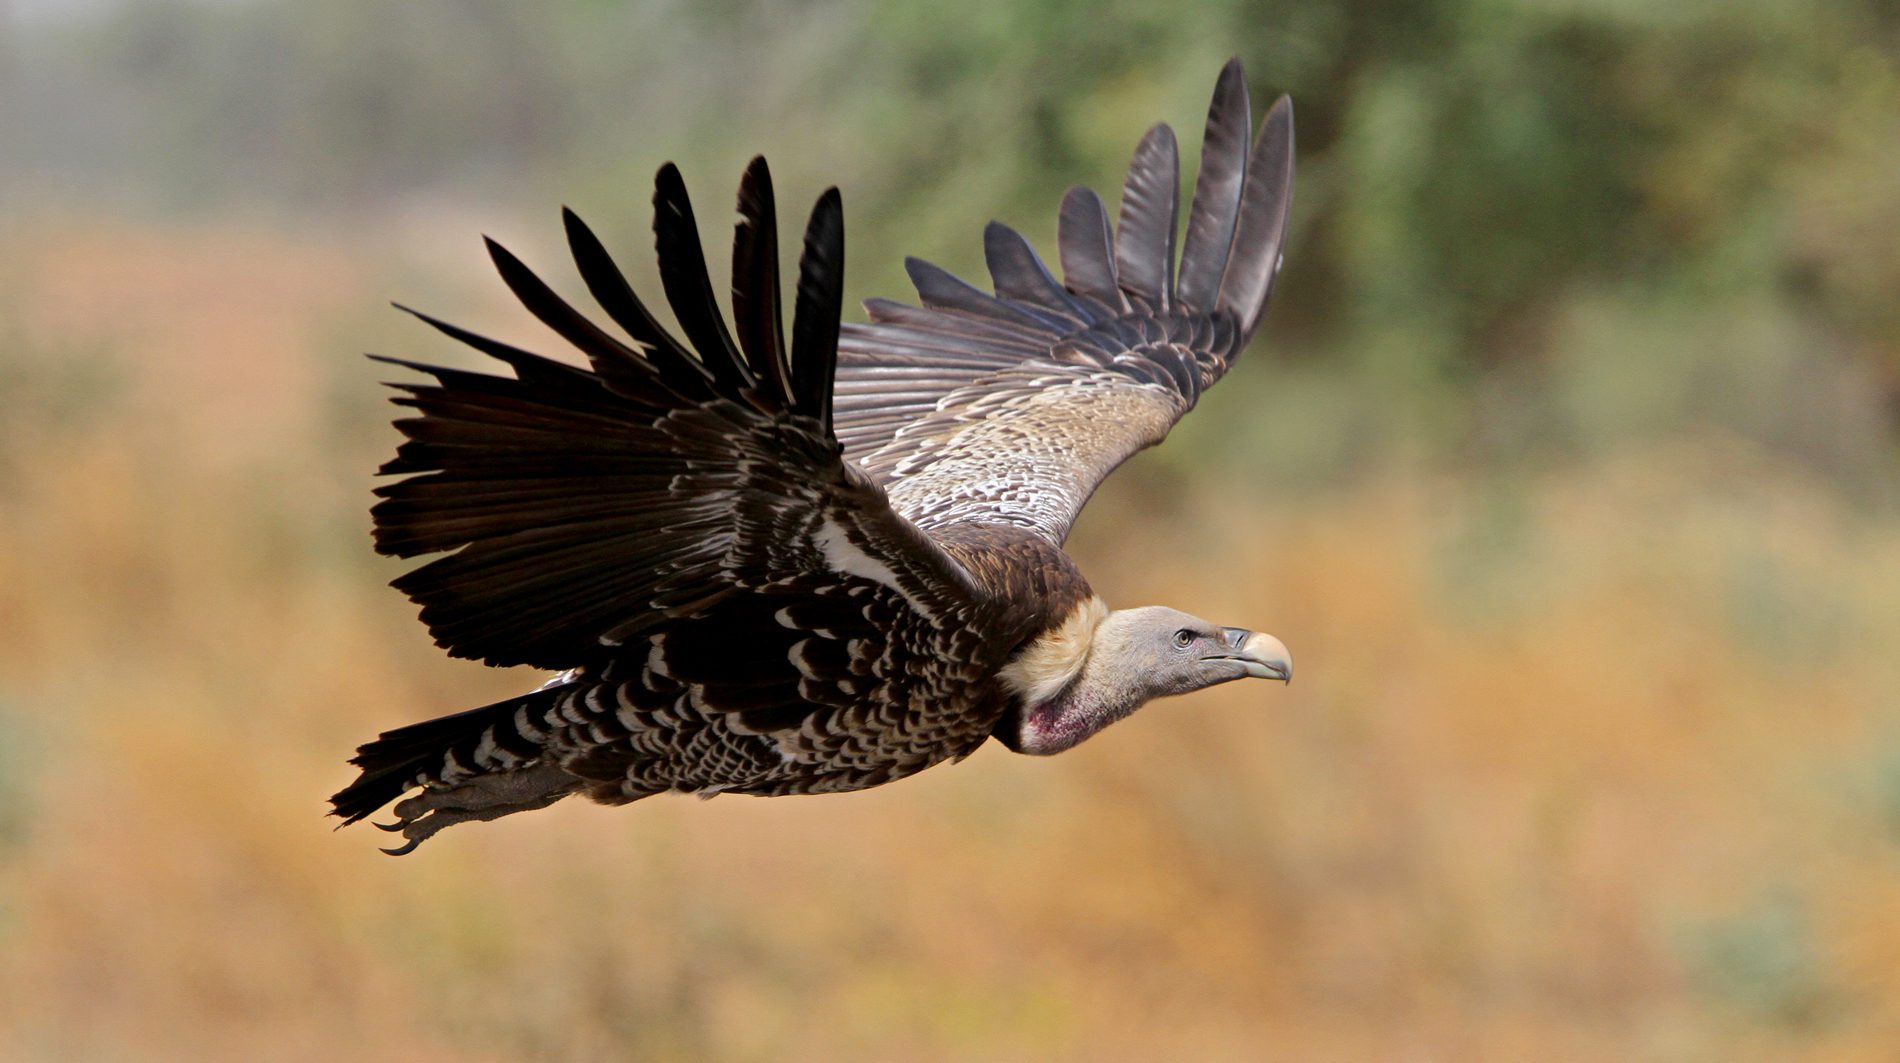 Africa's vultures are disappearing. A series of disasters could